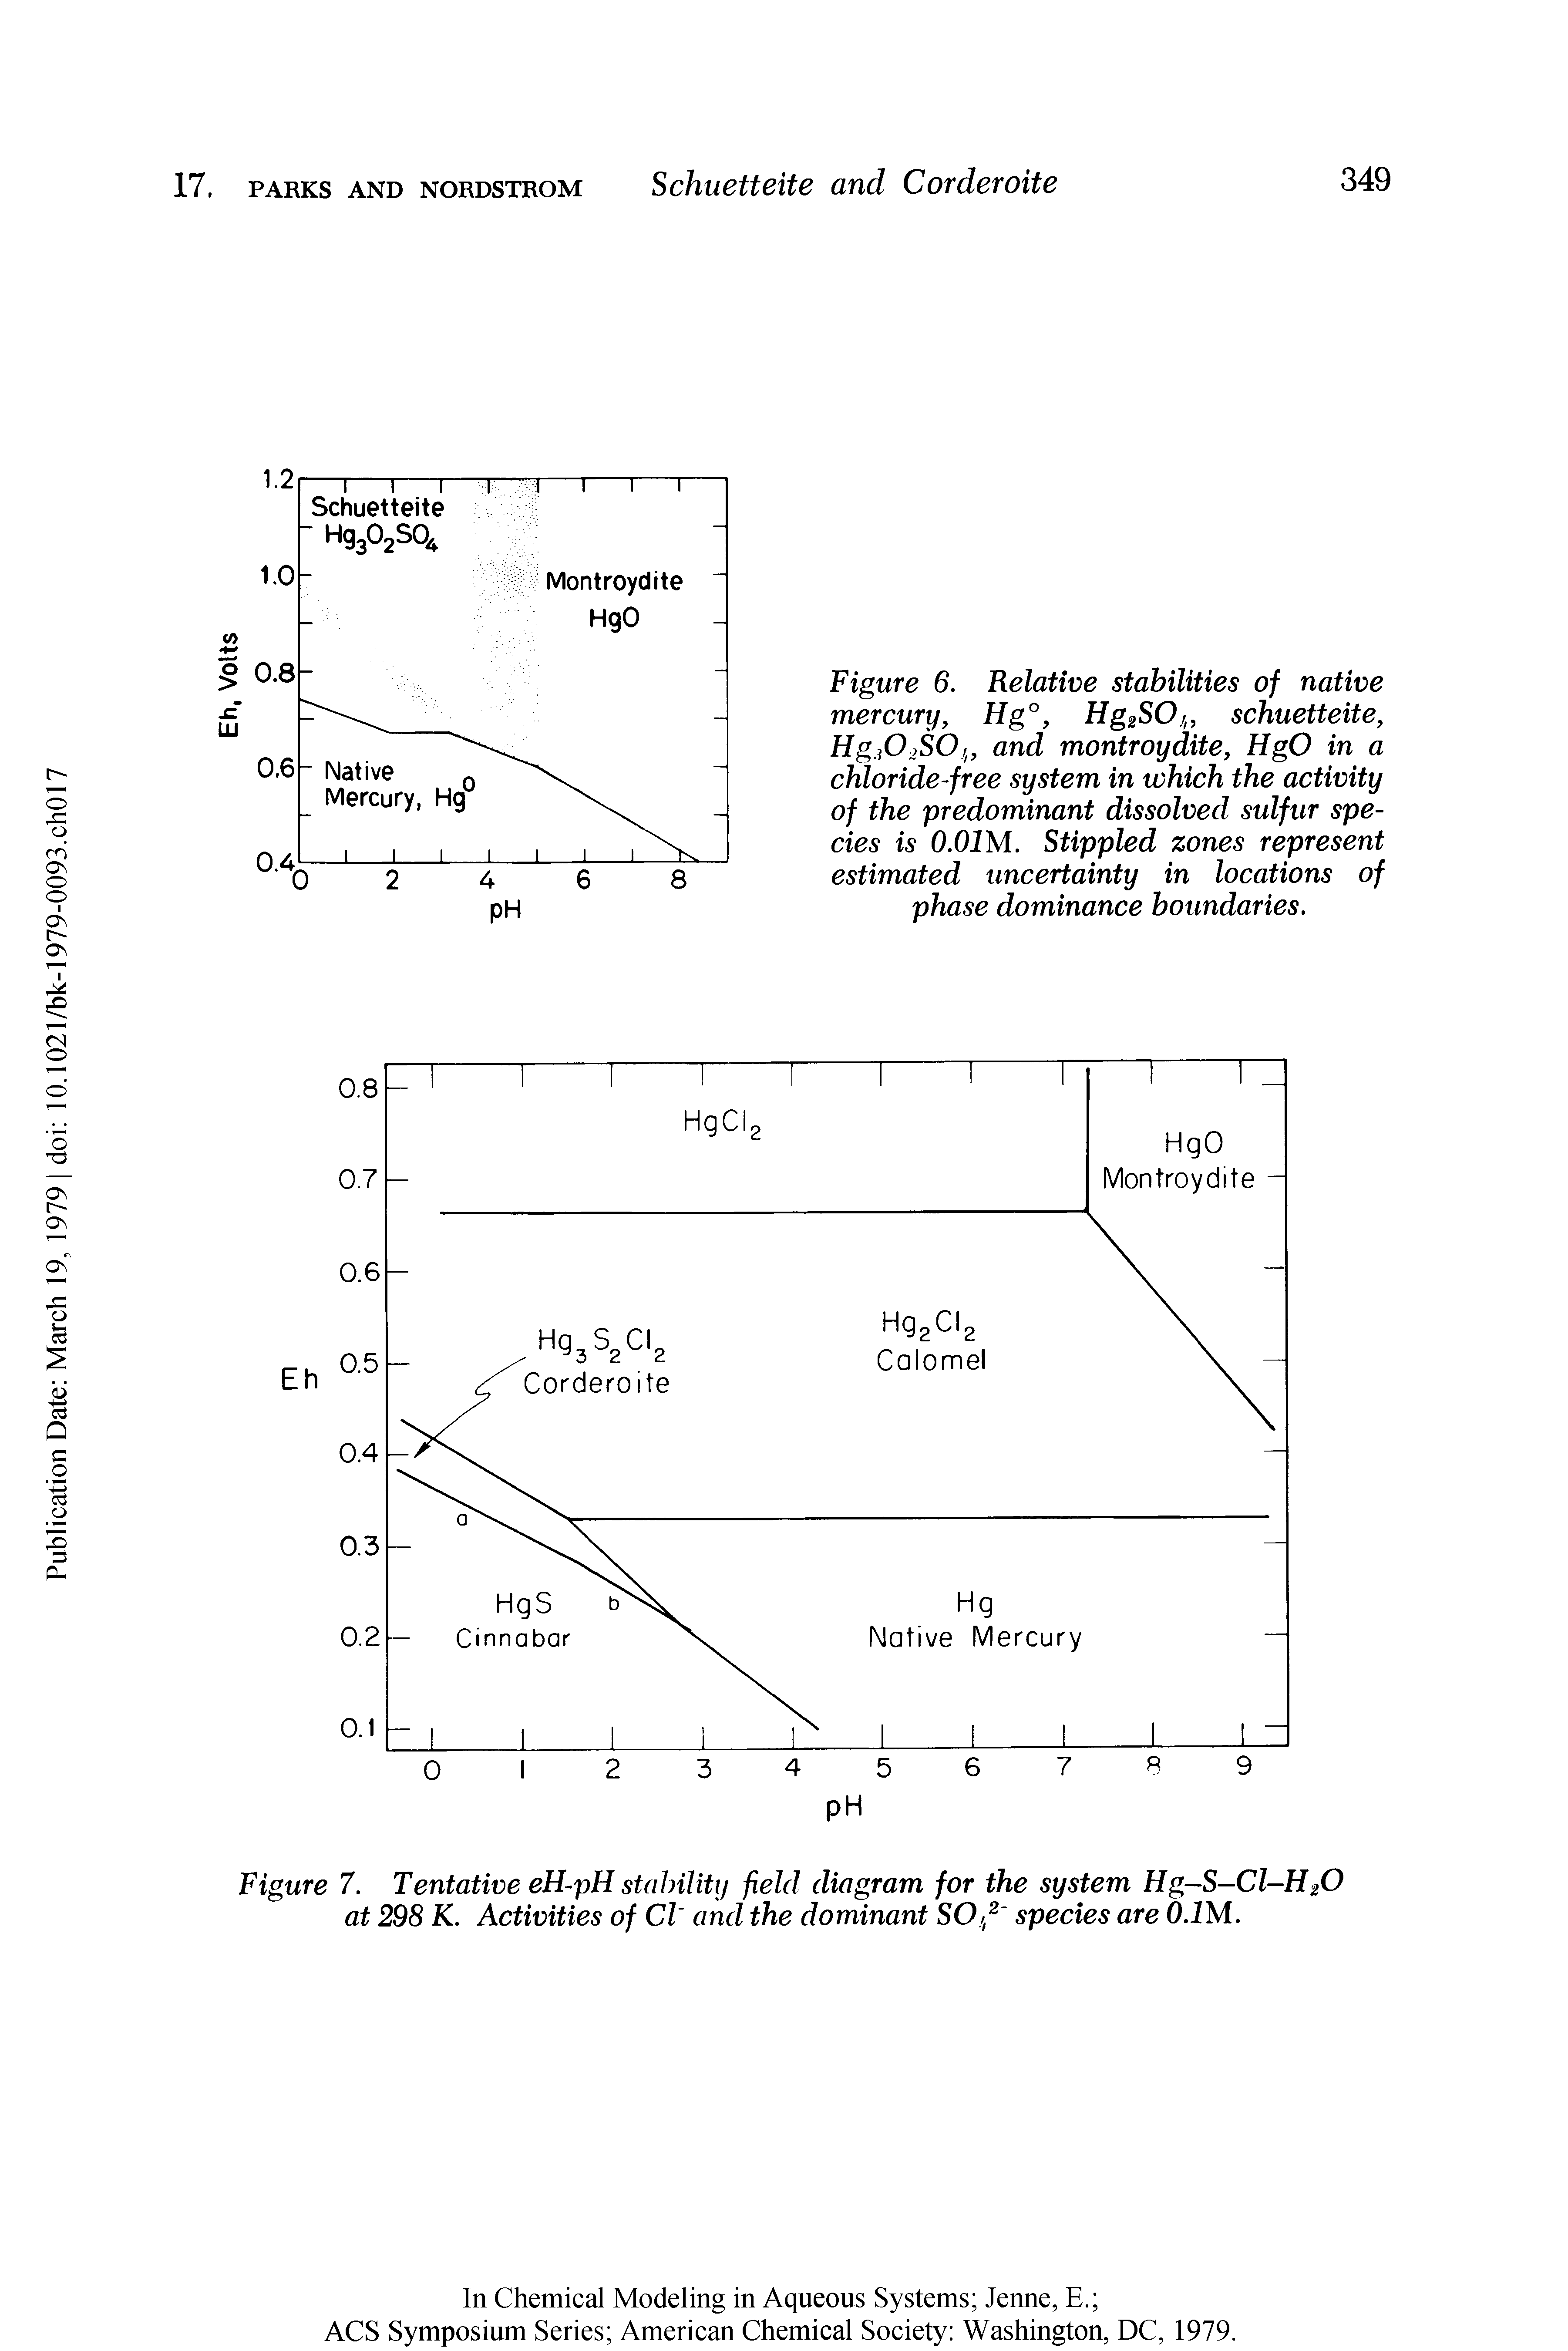 Figure 6. Relative stabilities of native mercury, Hg°, HgzSO/, schuctteite, Hgfio Oj, and montroydite, HgO in a chloride-free system in which the activity of the predominant dissolved sulfur species is O.OIM. Stippled zones represent estimated uncertainty in locations of phase dominance boundaries.